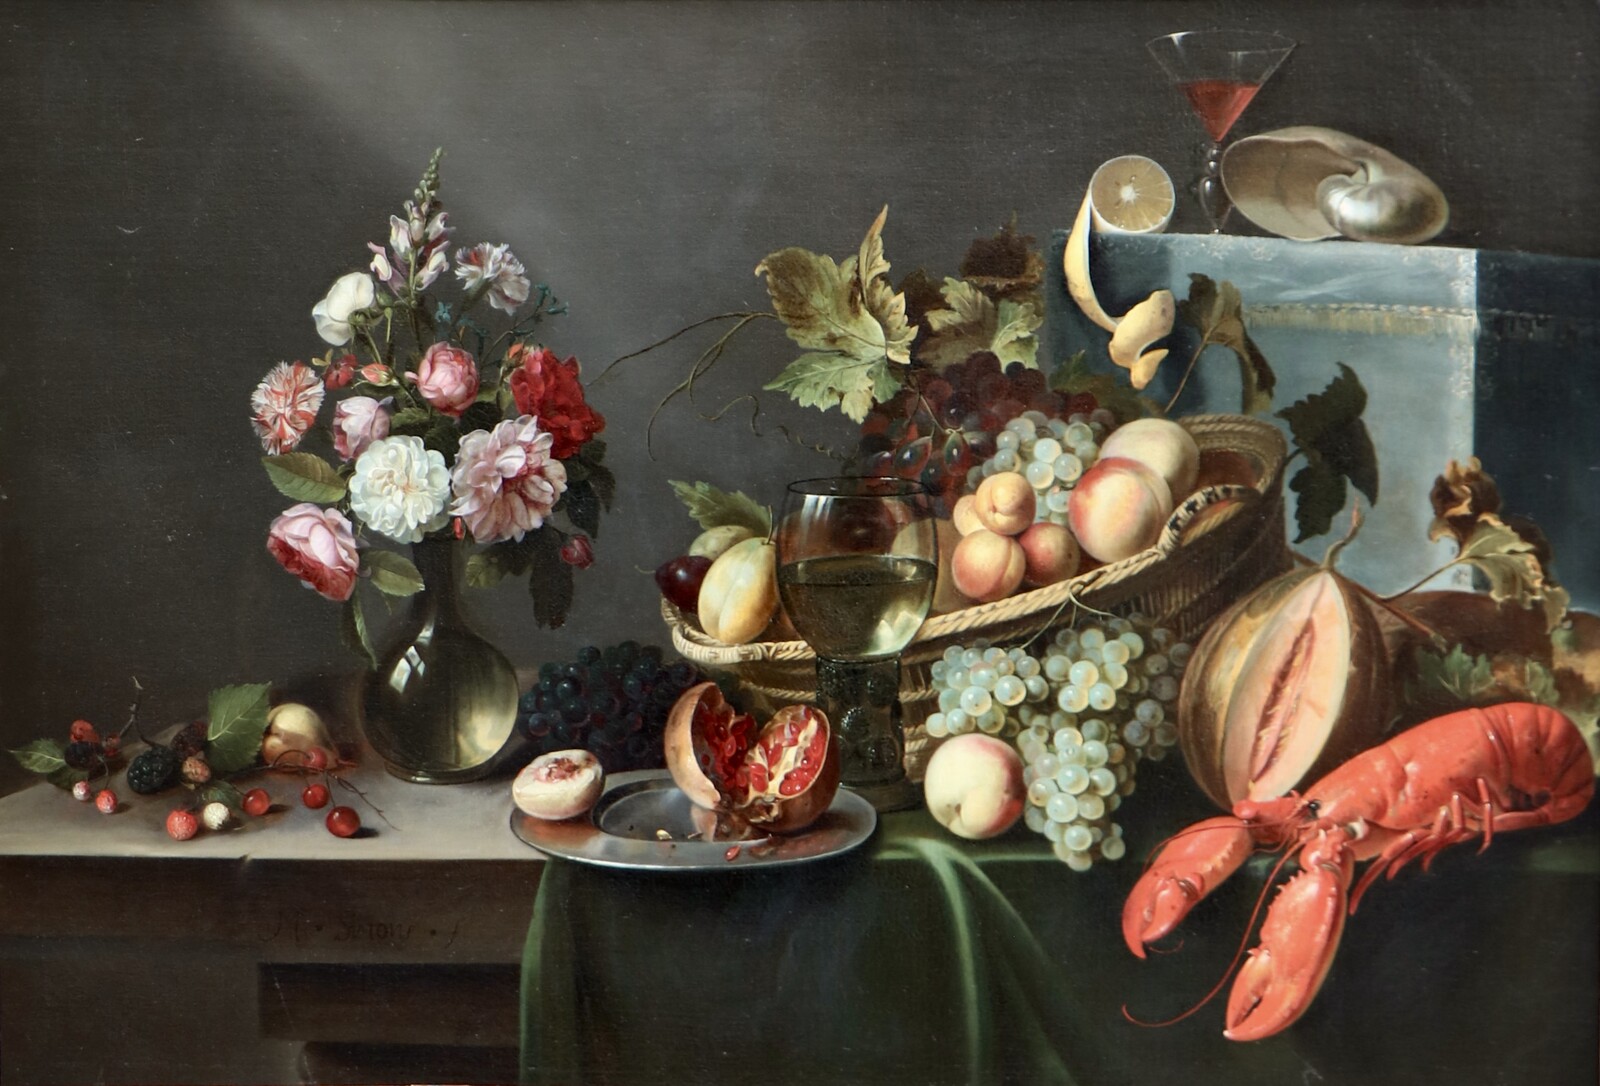 An ornate or Pronk still life